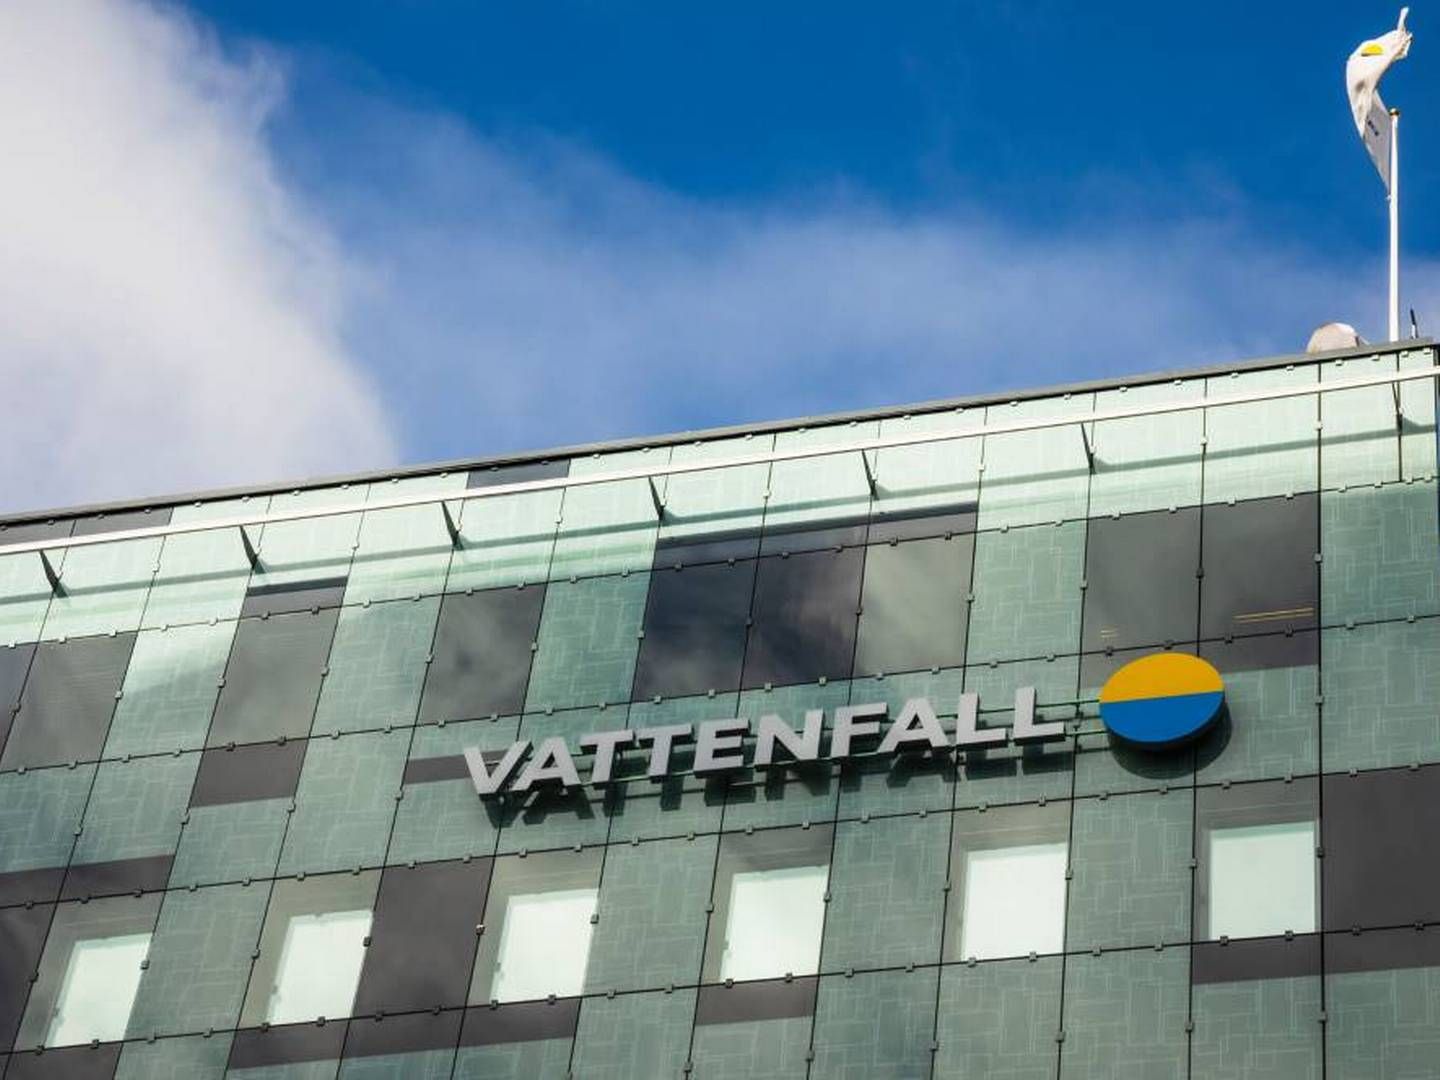 A quarter in the red is nothing more than a minor bump in the road for the Swedish energy company, which still turned a profit in the first half of the year. | Photo: Vattenfall